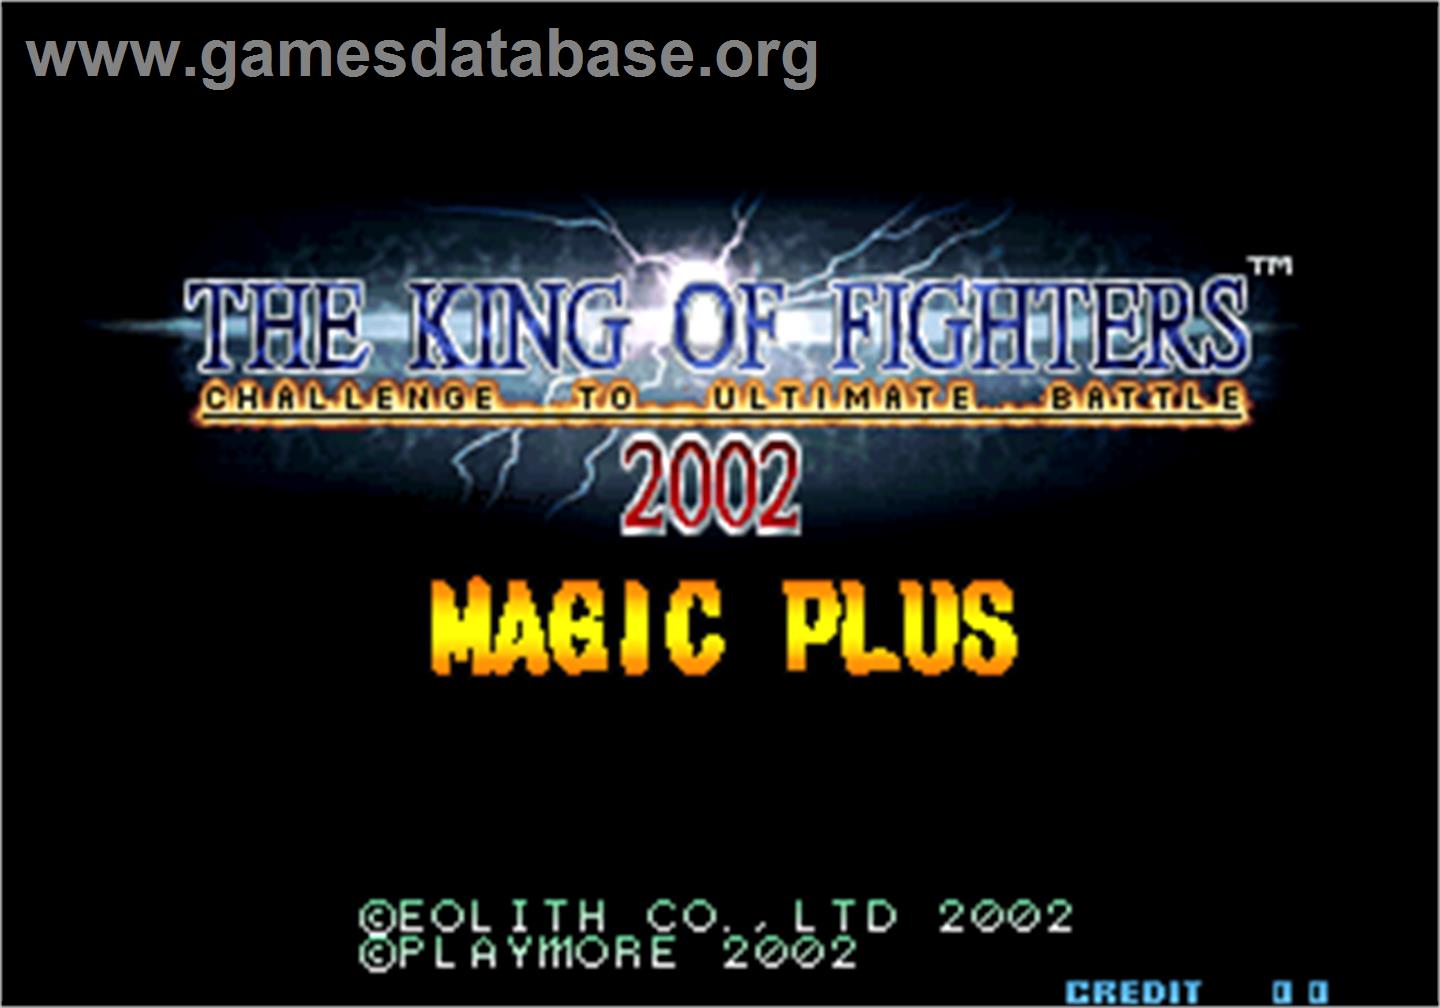 The King of Fighters 2002 Magic Plus - Arcade - Artwork - Title Screen